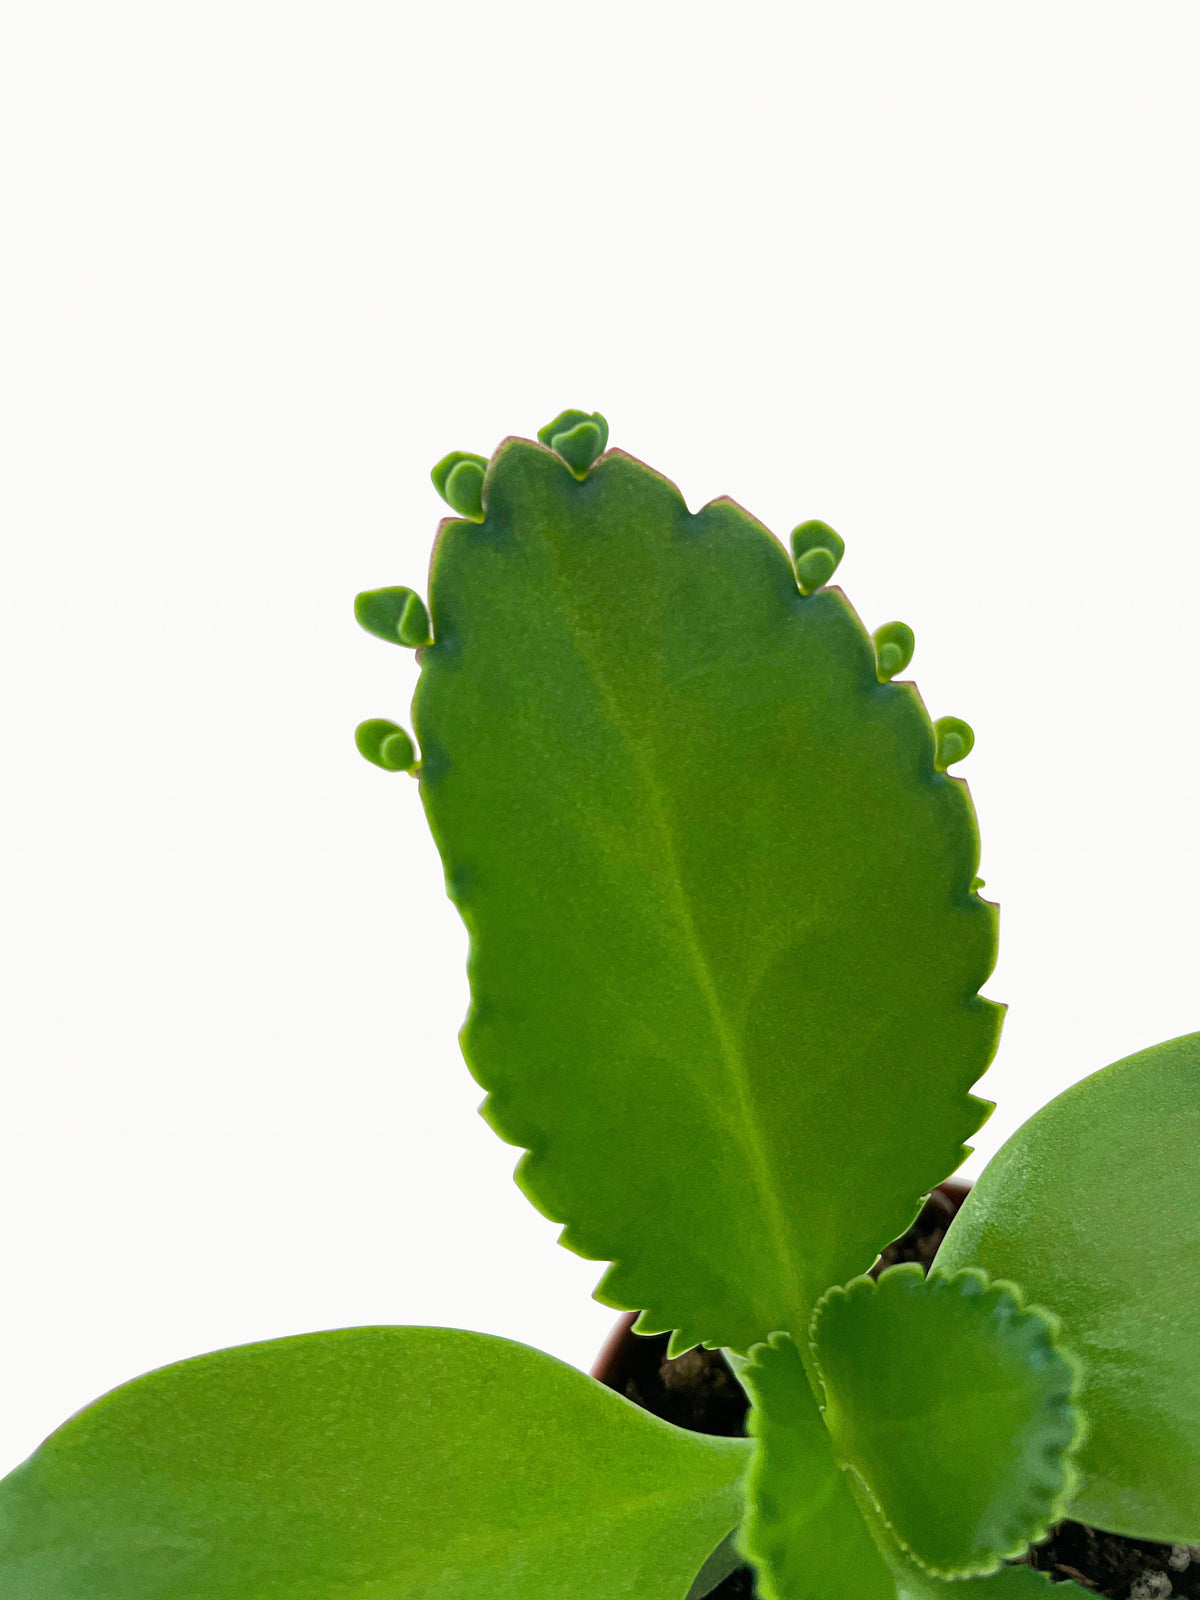 Kalanchoe Daigremontiana 'Mother of Thousands' Succulent by Bumble Plants